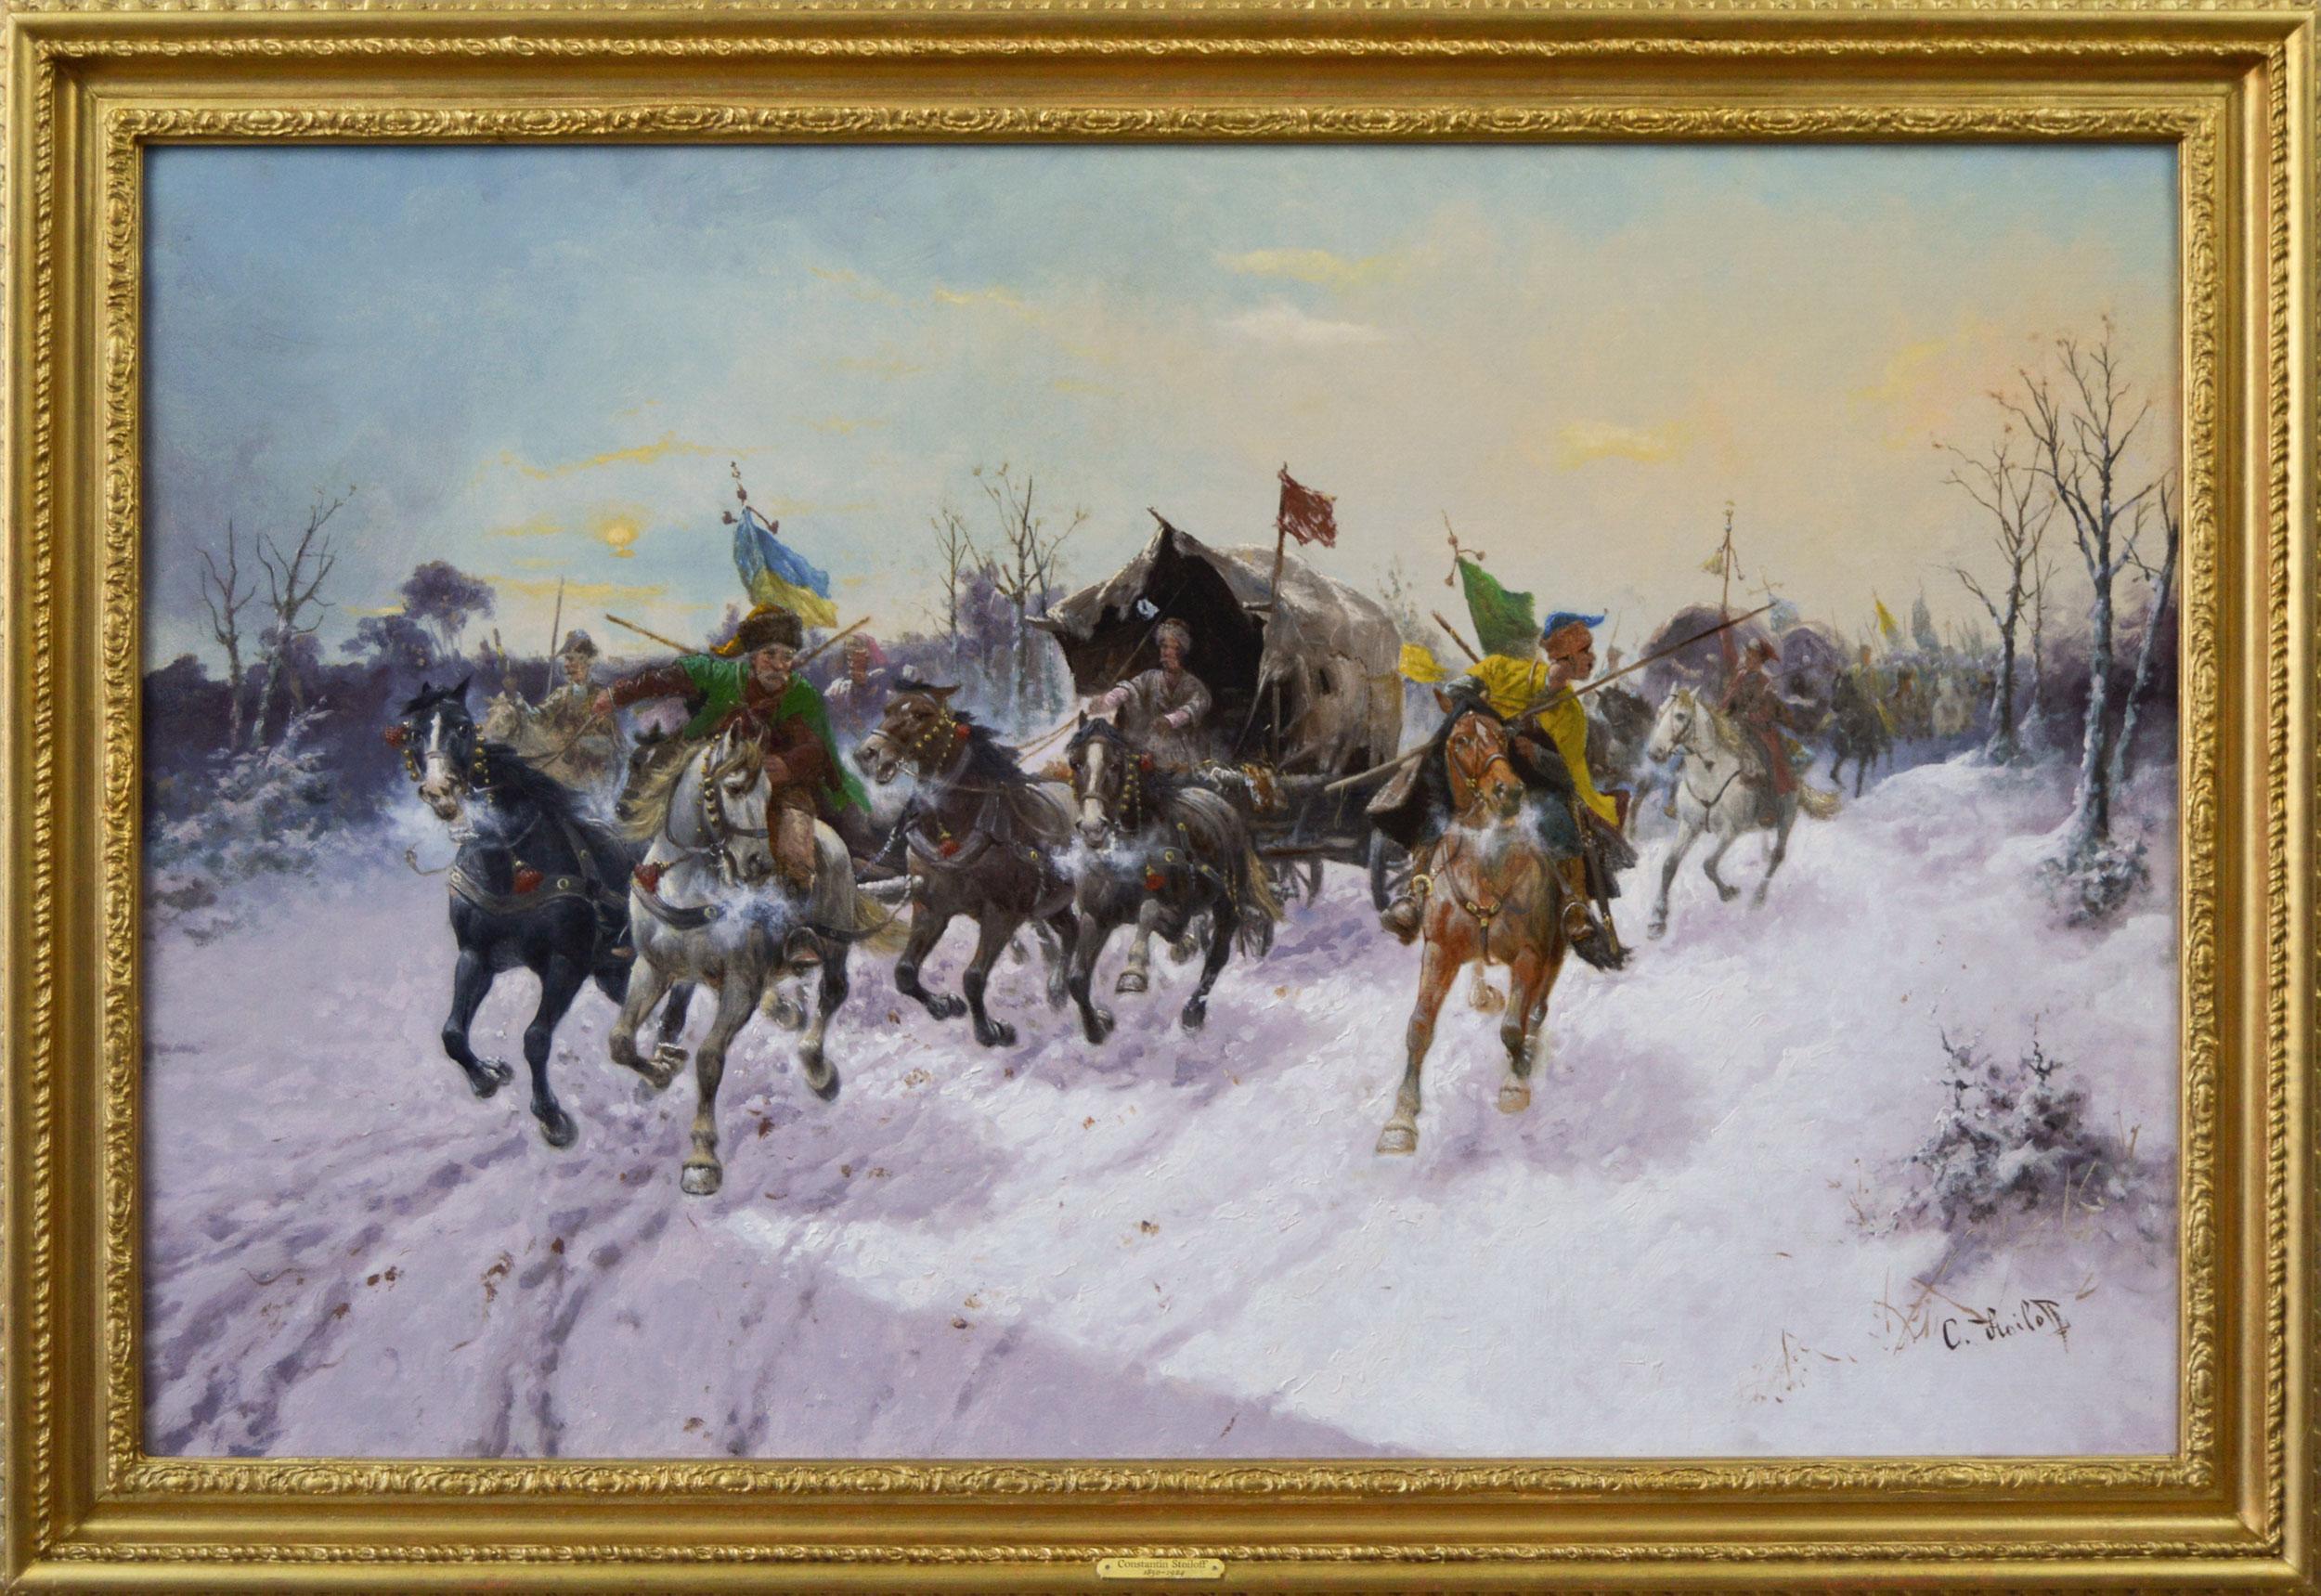 Adolf Constantin Baumgartner-Stoiloff Animal Painting - 19th Century winter landscape oil painting of a caravan with Cossacks on horses